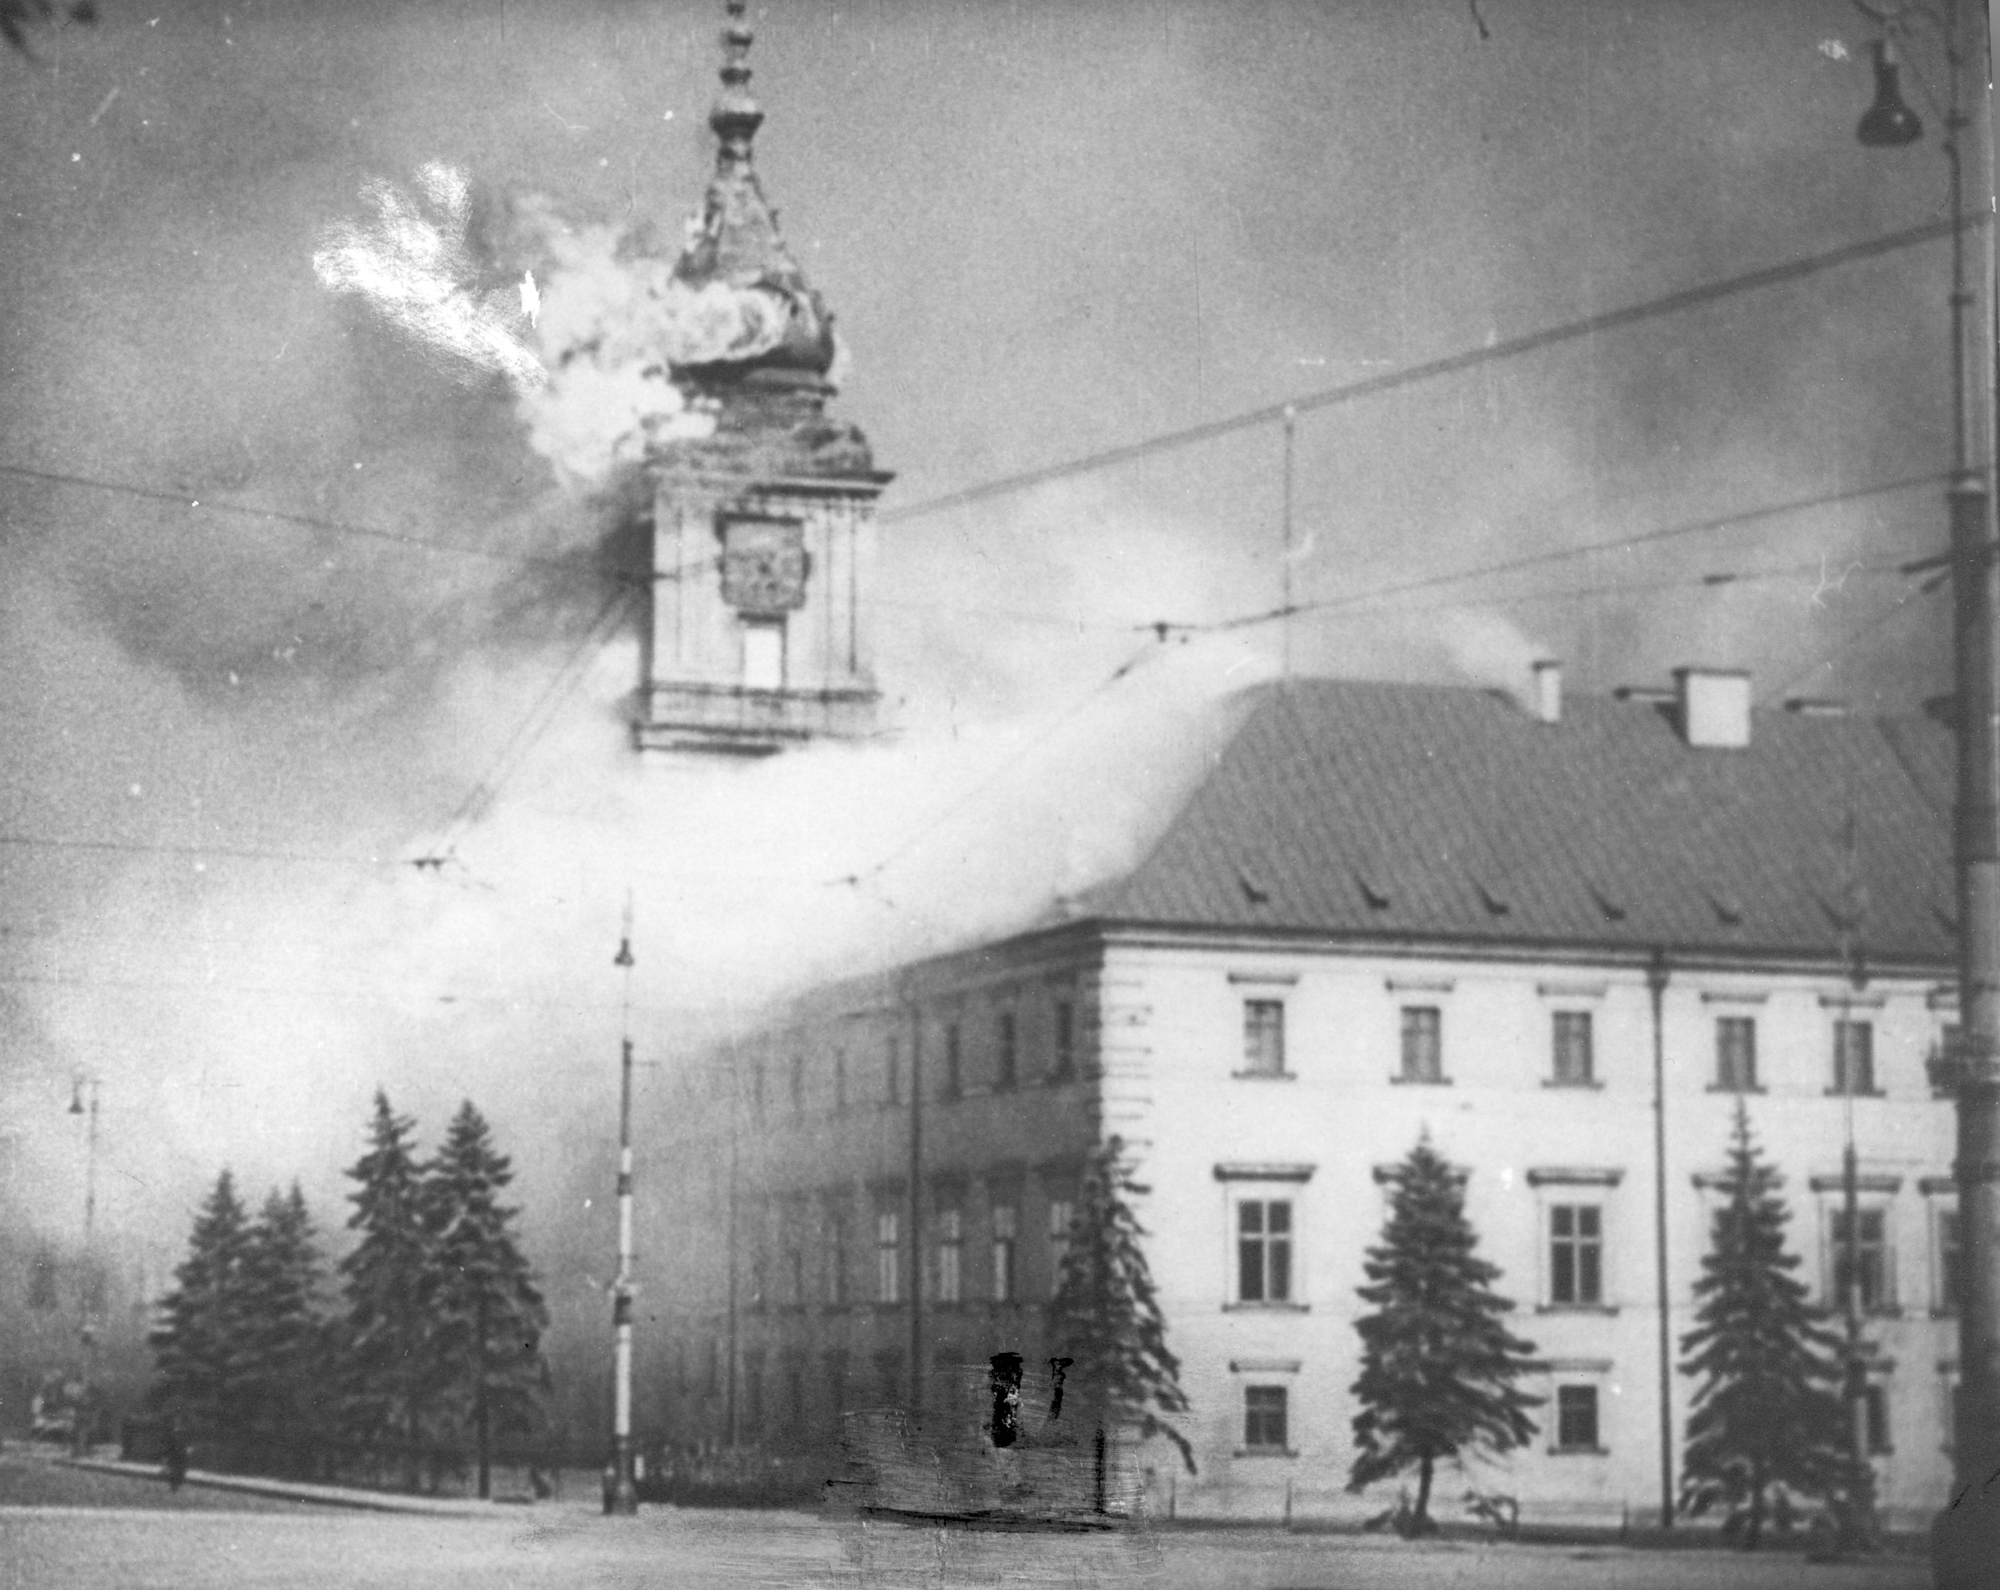 The Royal Castle in Warsaw, Poland burning after being hit by German shellfire, 17 Sep 1939